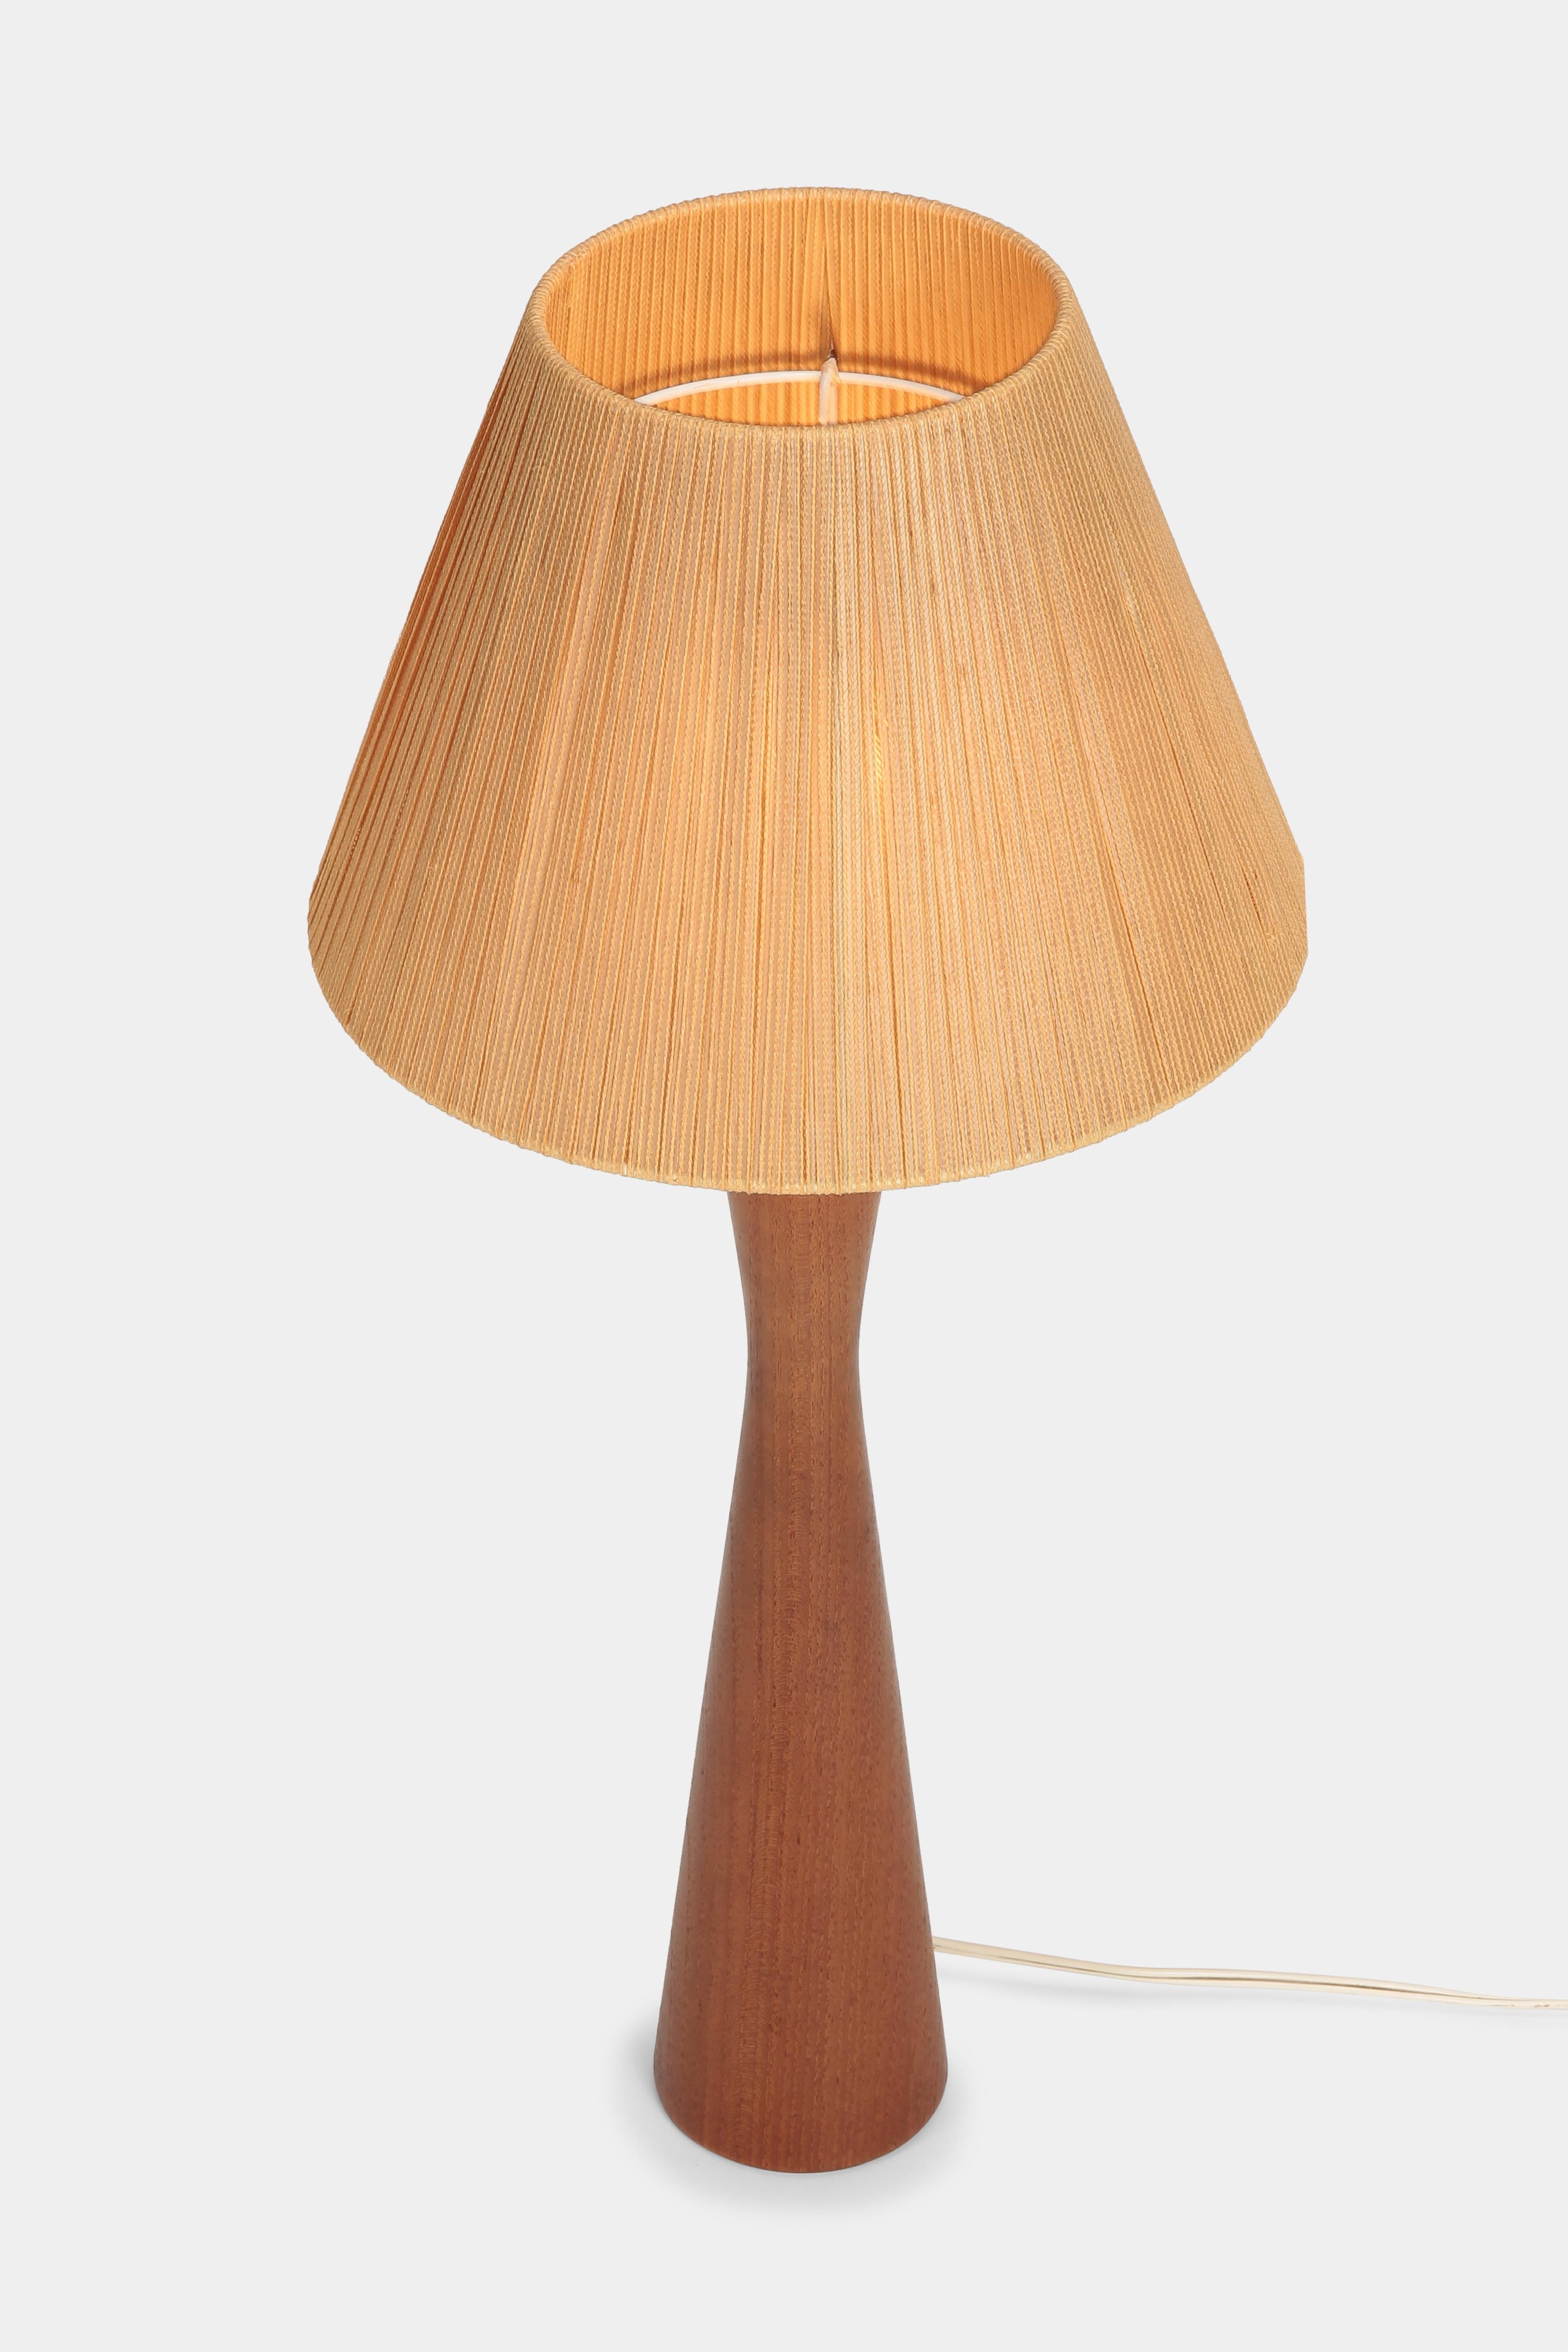 Beautiful, tall table lamp made of solid teak wood and with an authentic braided cord lampshade by the company ESA from Denmark. The lamp is in very good vintage condition. The lampshade has a diameter of 29.5cm and is 21cm long.